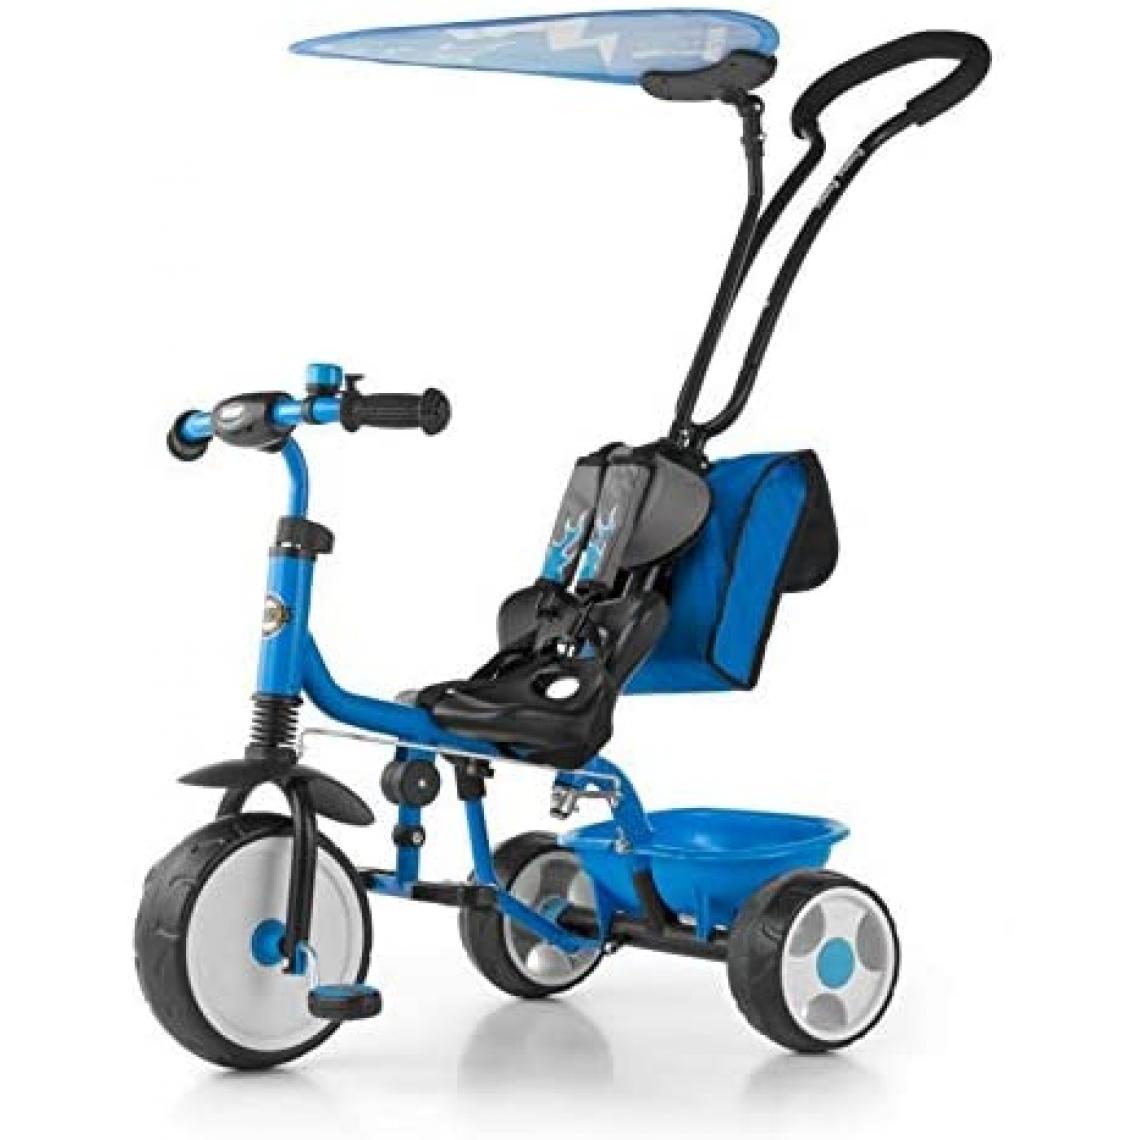 Milly Mally - Tricycle BOBY DELUX 2015 bleu - Tricycle